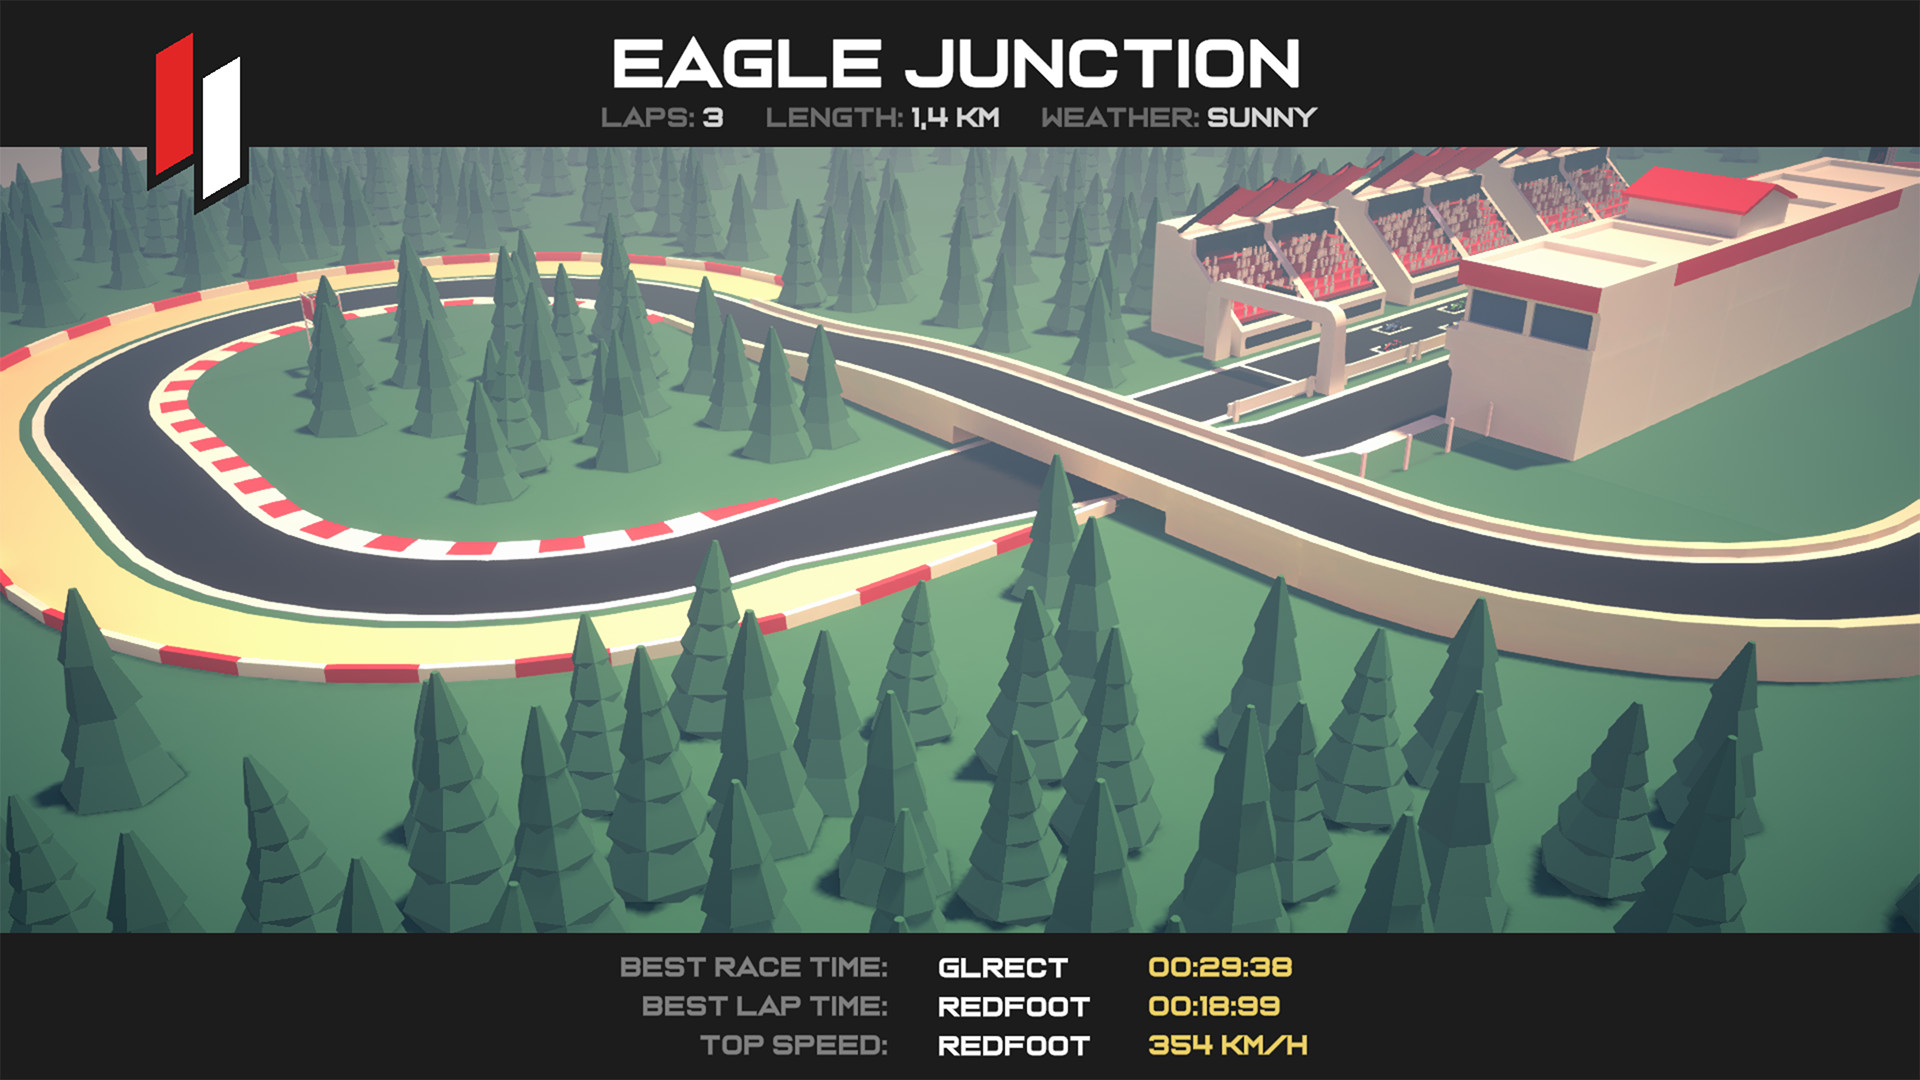 Race Condition Free Download